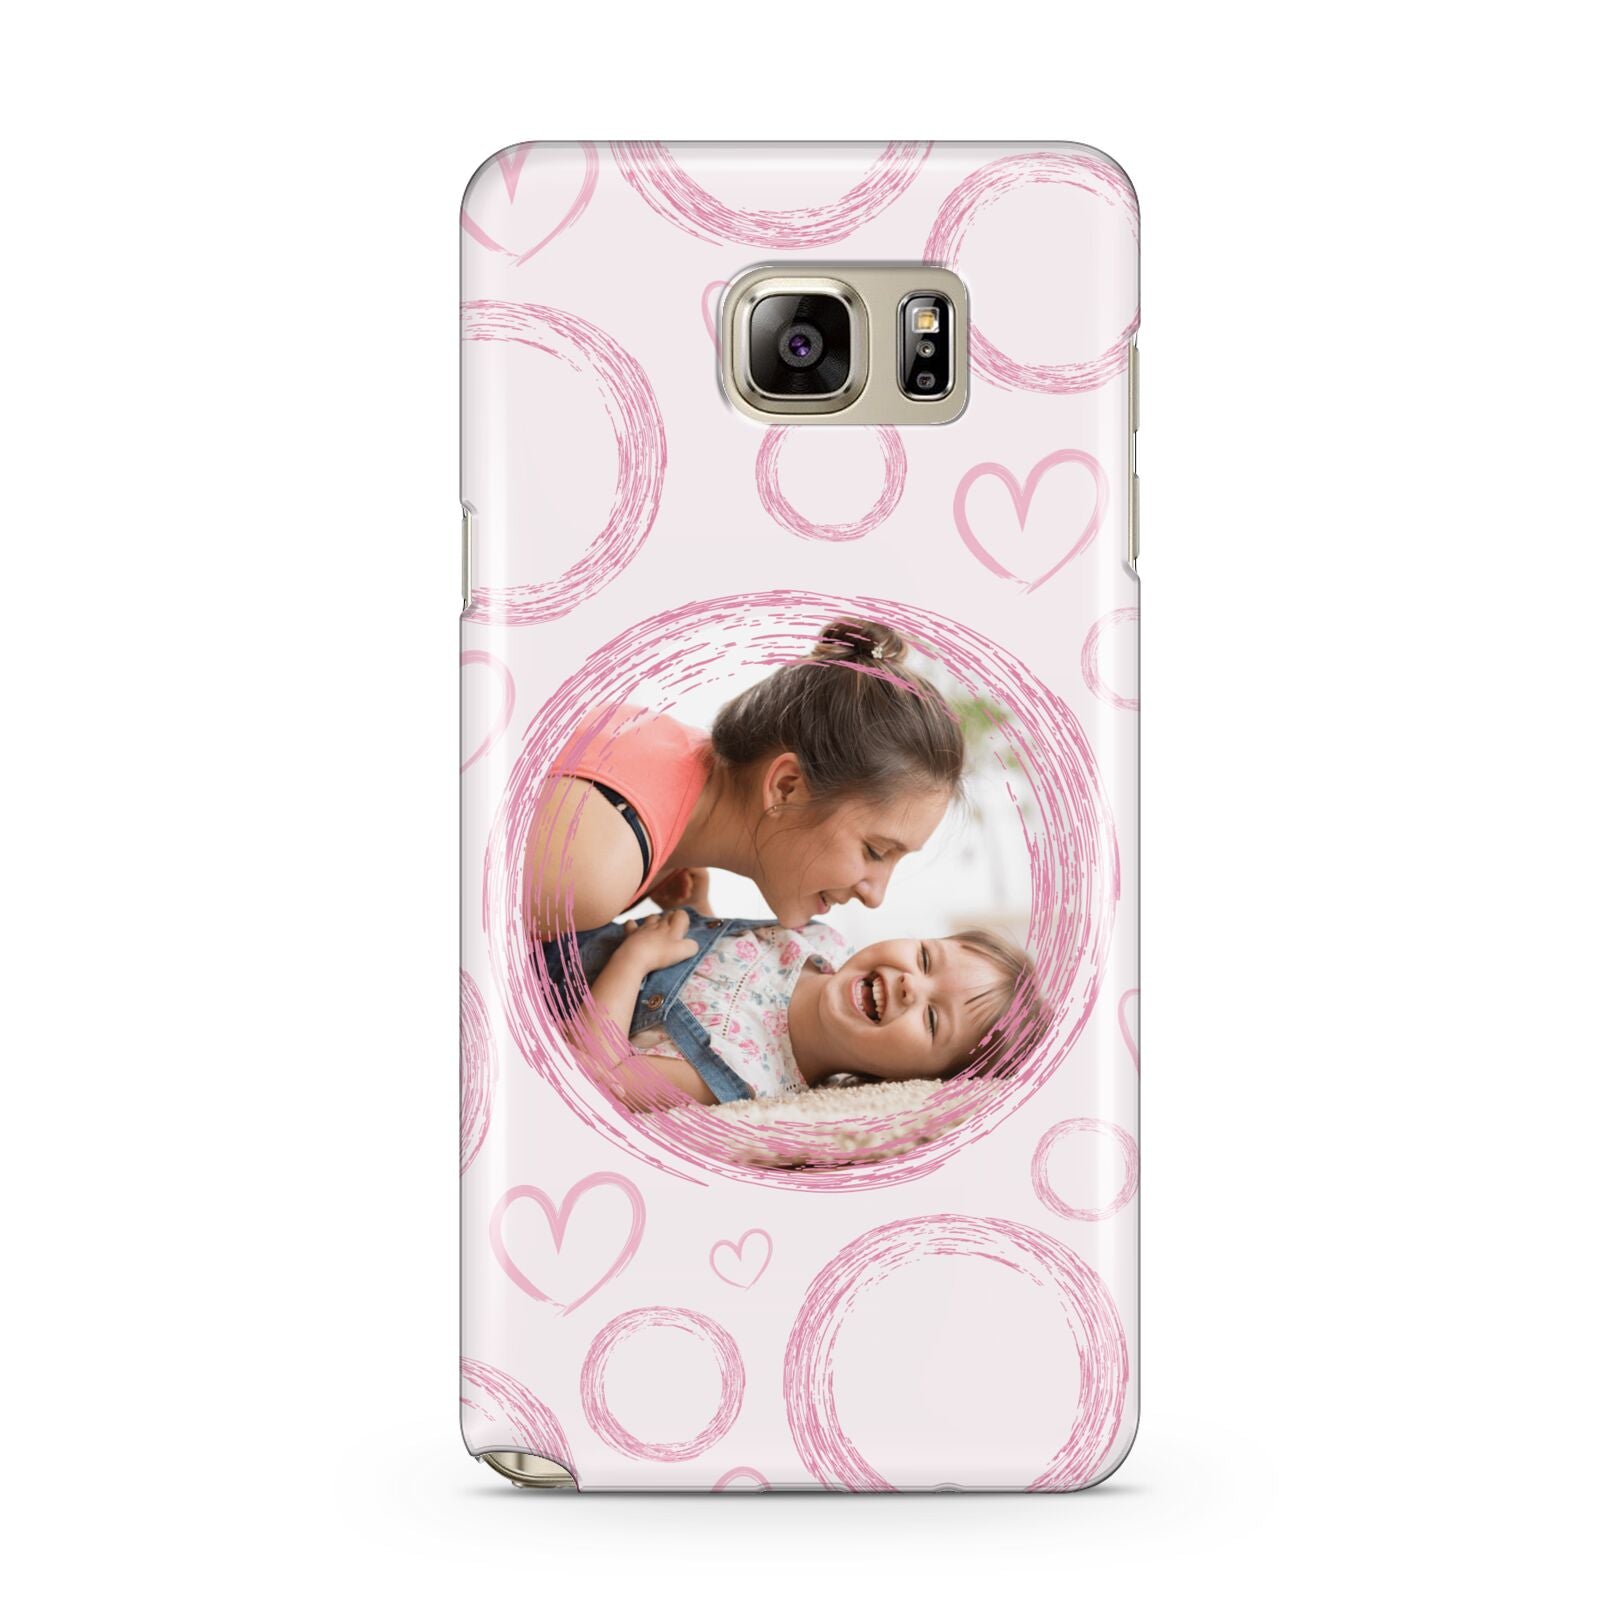 Pink Love Hearts Photo Personalised Samsung Galaxy Note 5 Case